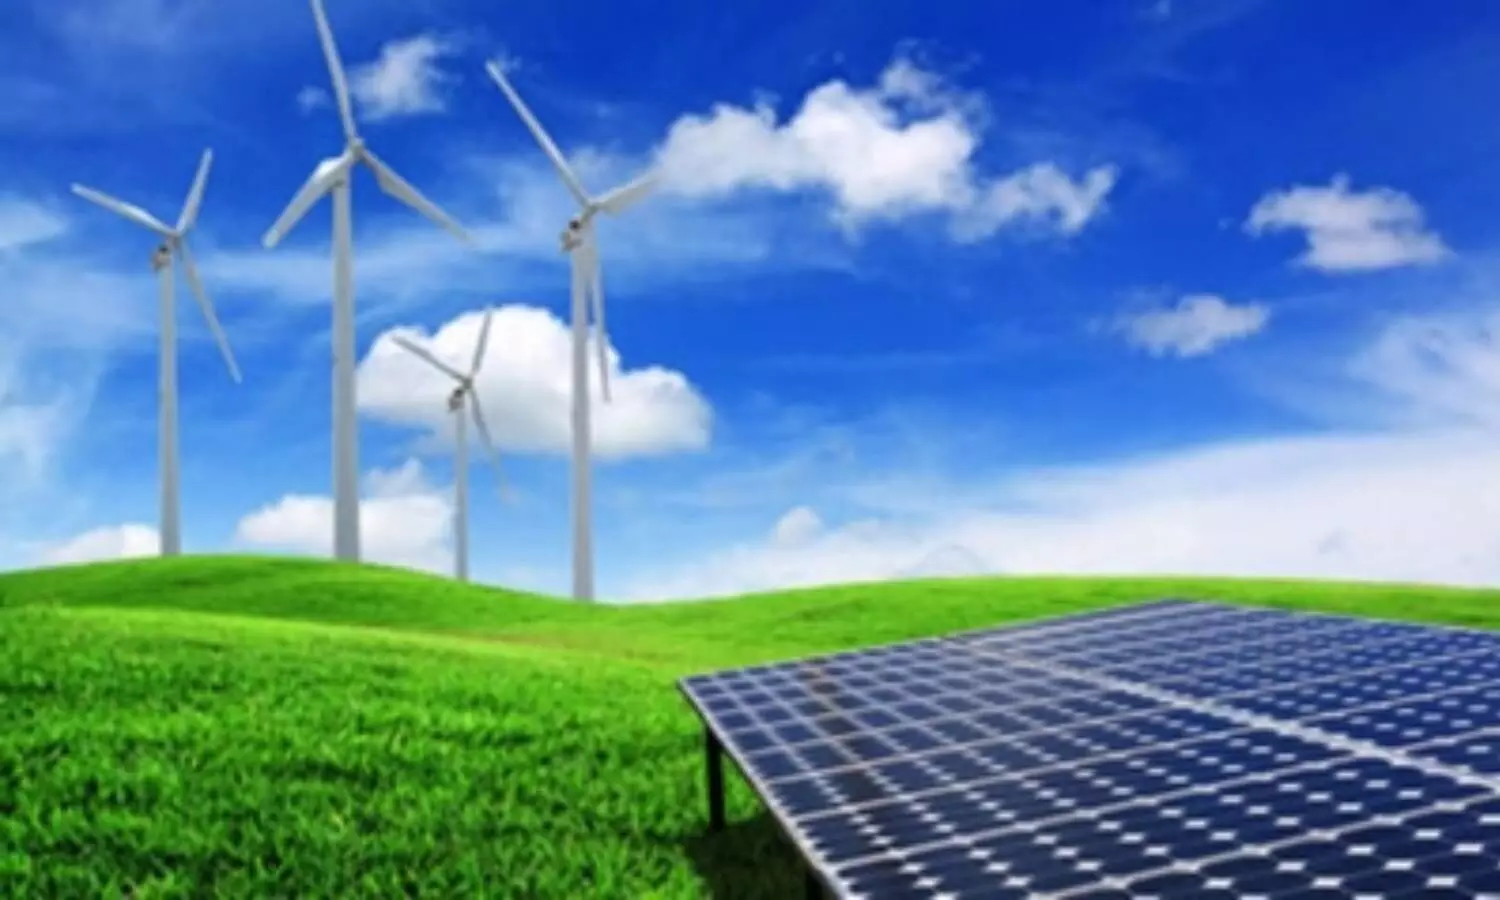 Renewables power Nov all-India electricity generation